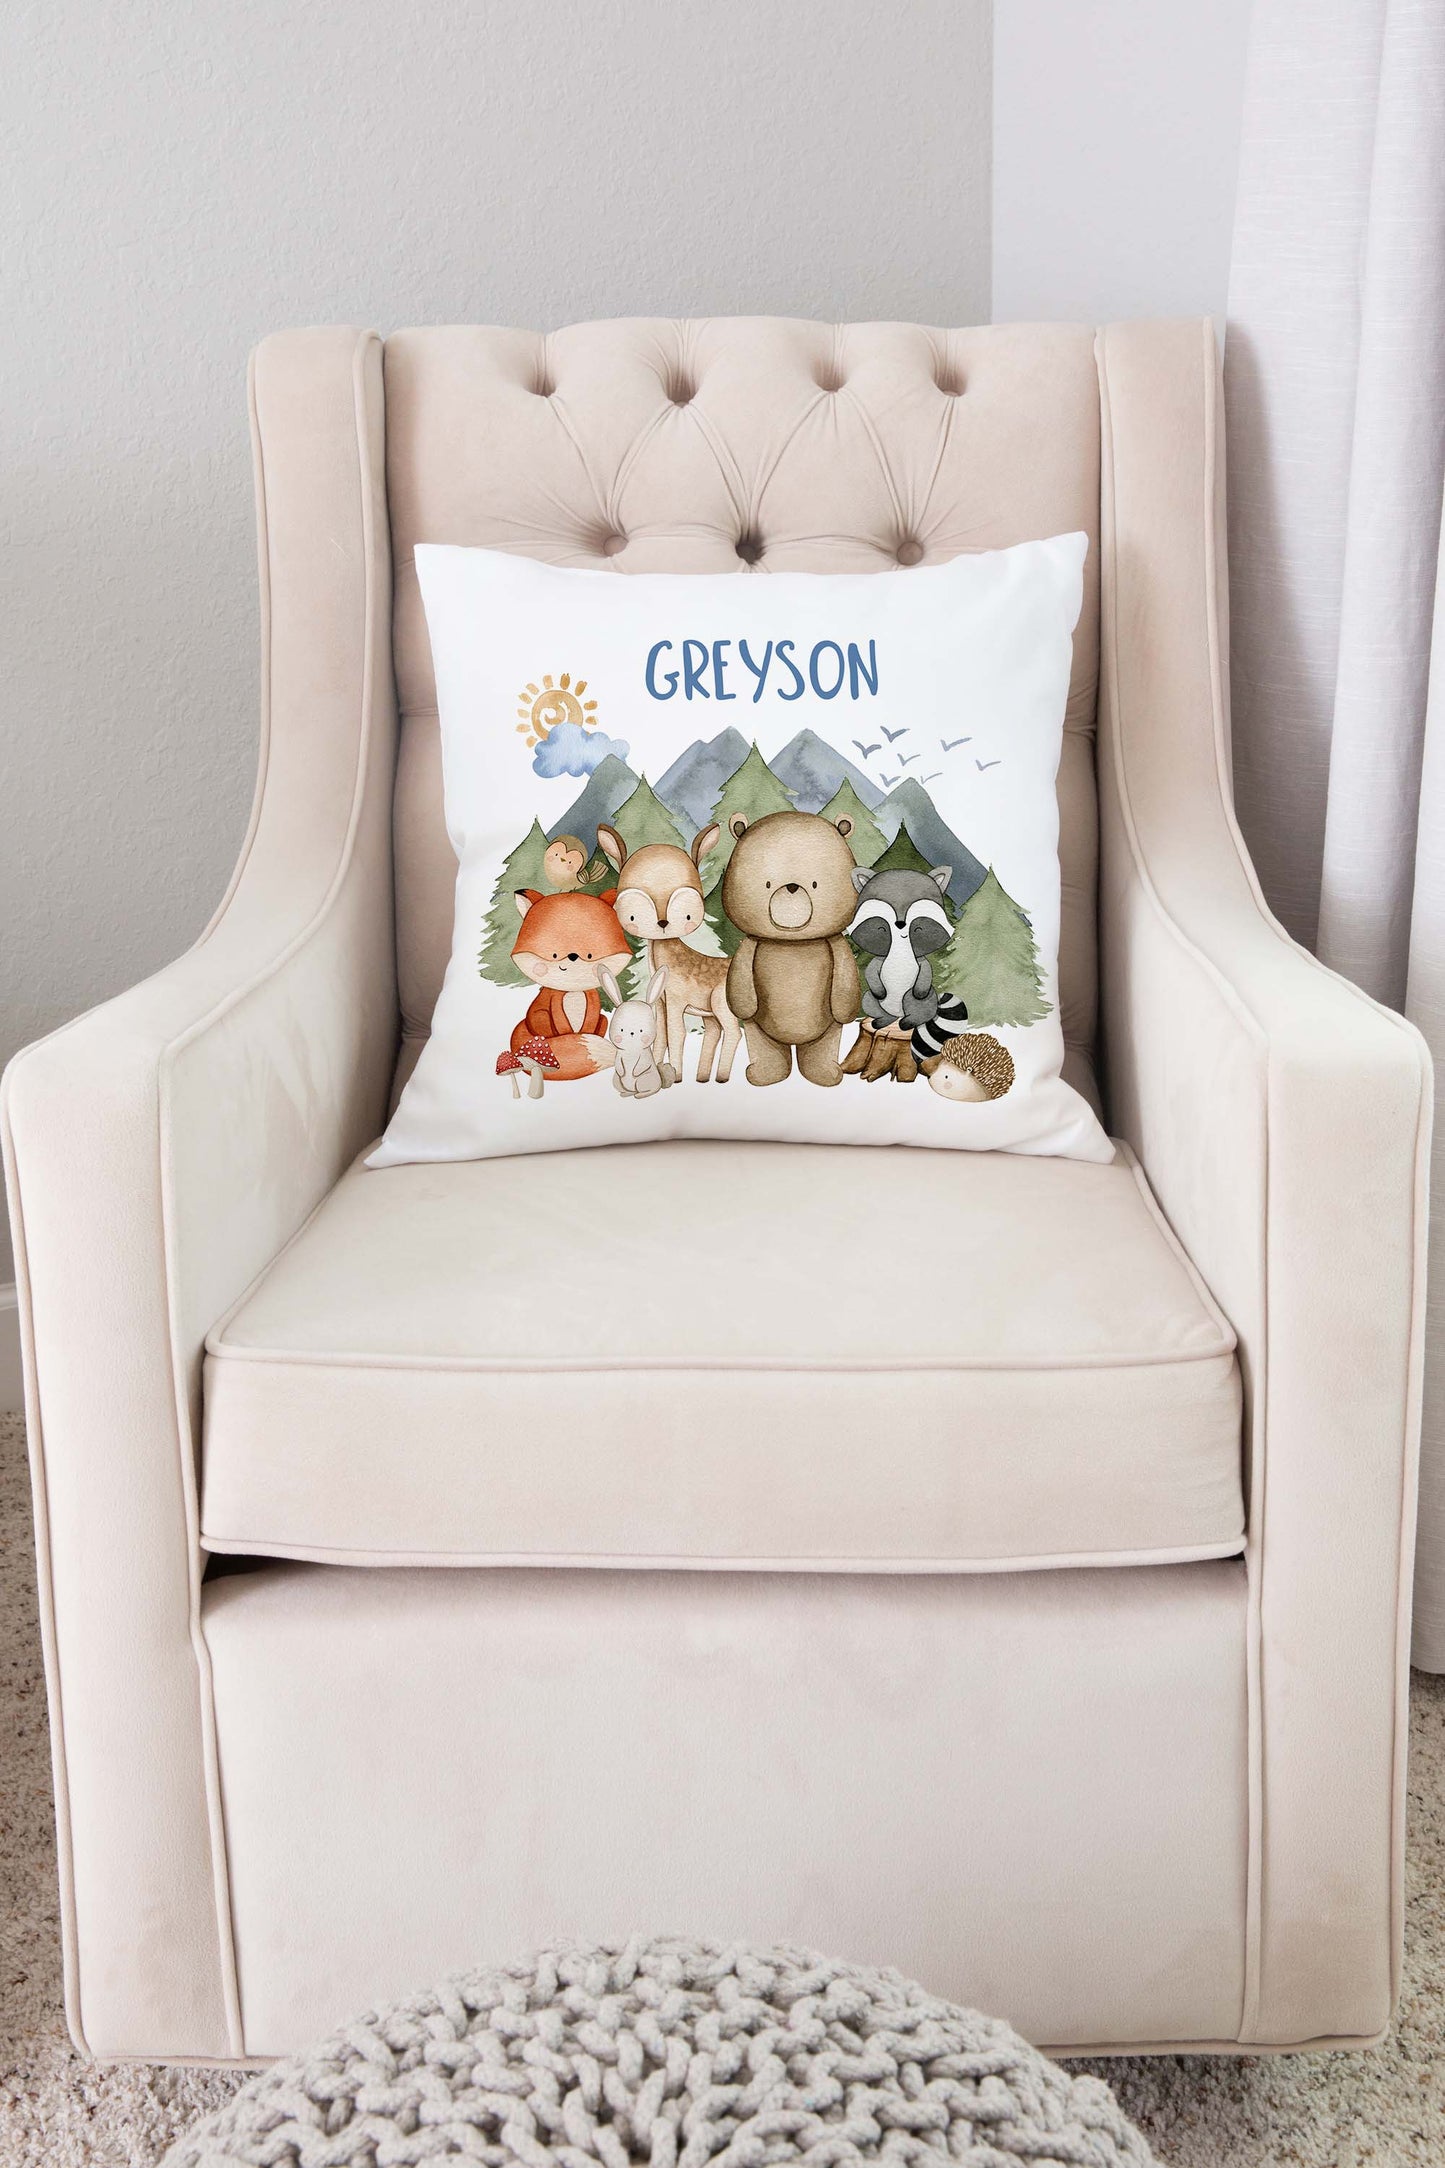 Personalized Woodland Animals Pillow cover, Forest Nursery Decor - Magical Forest